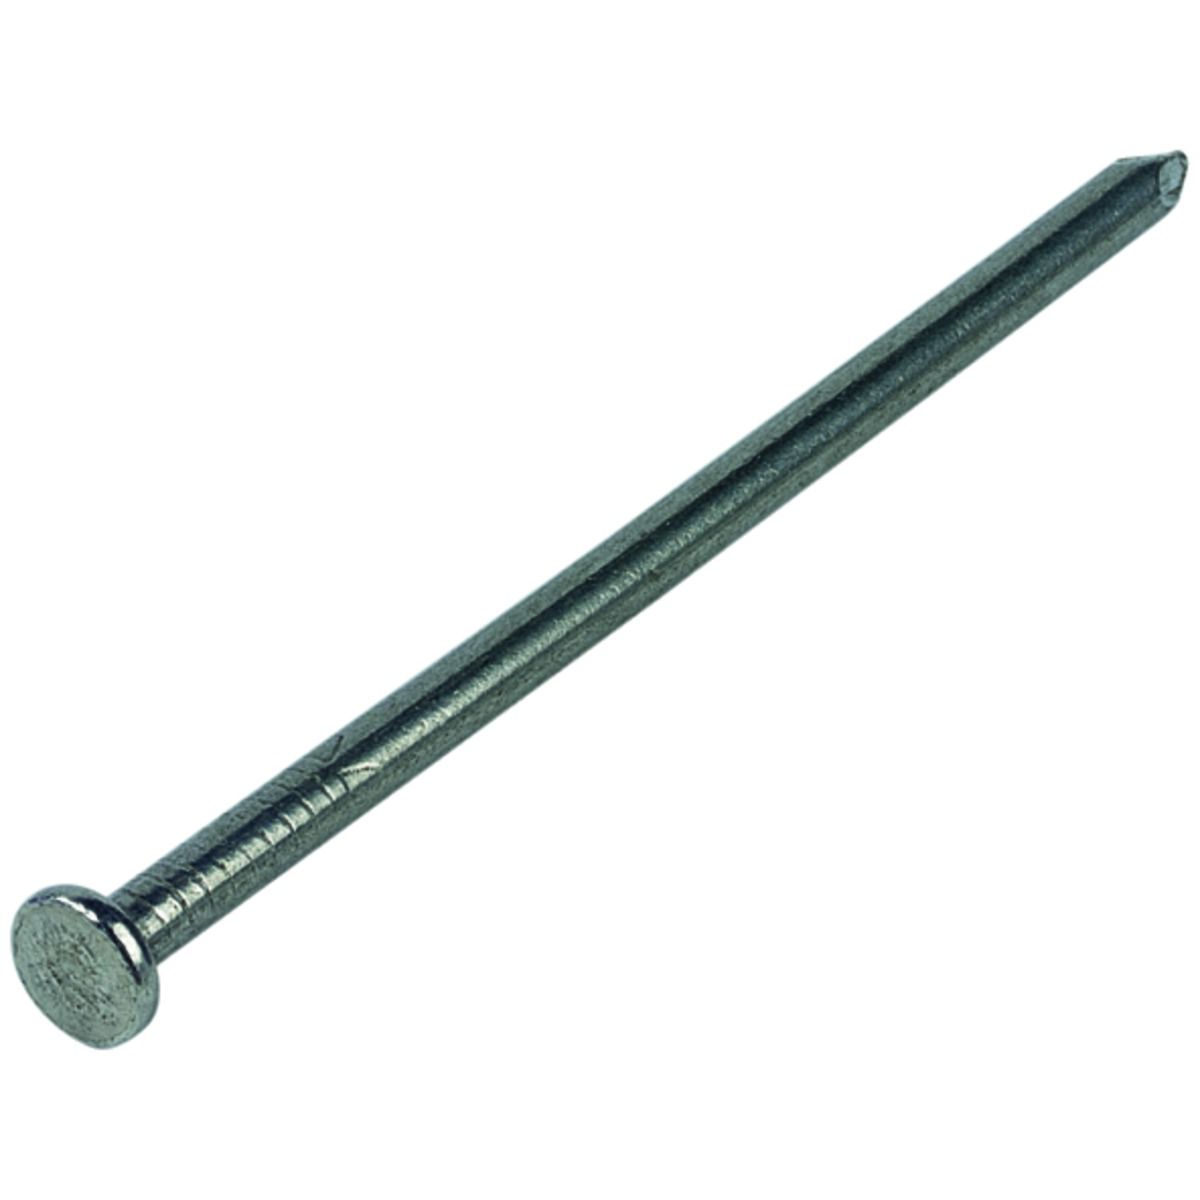 Image of Wickes 75mm Bright Round Wire Nails - 400g